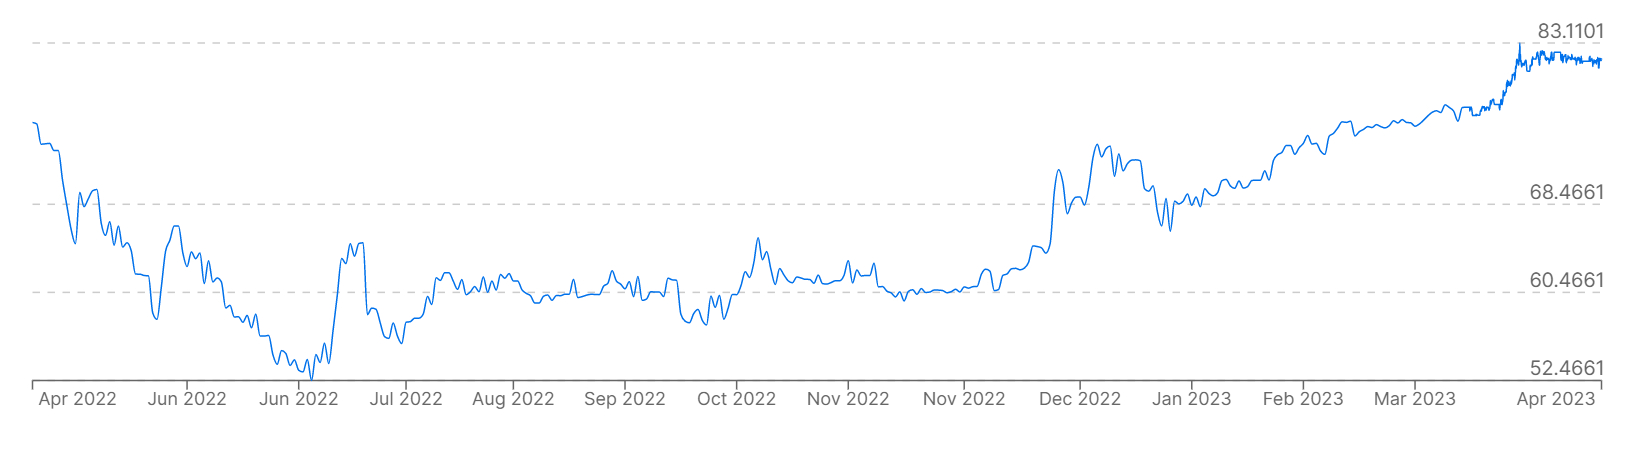 A graph showing the price of the US dollar versus Russia&rsquo;s ruble over the past 12 months.